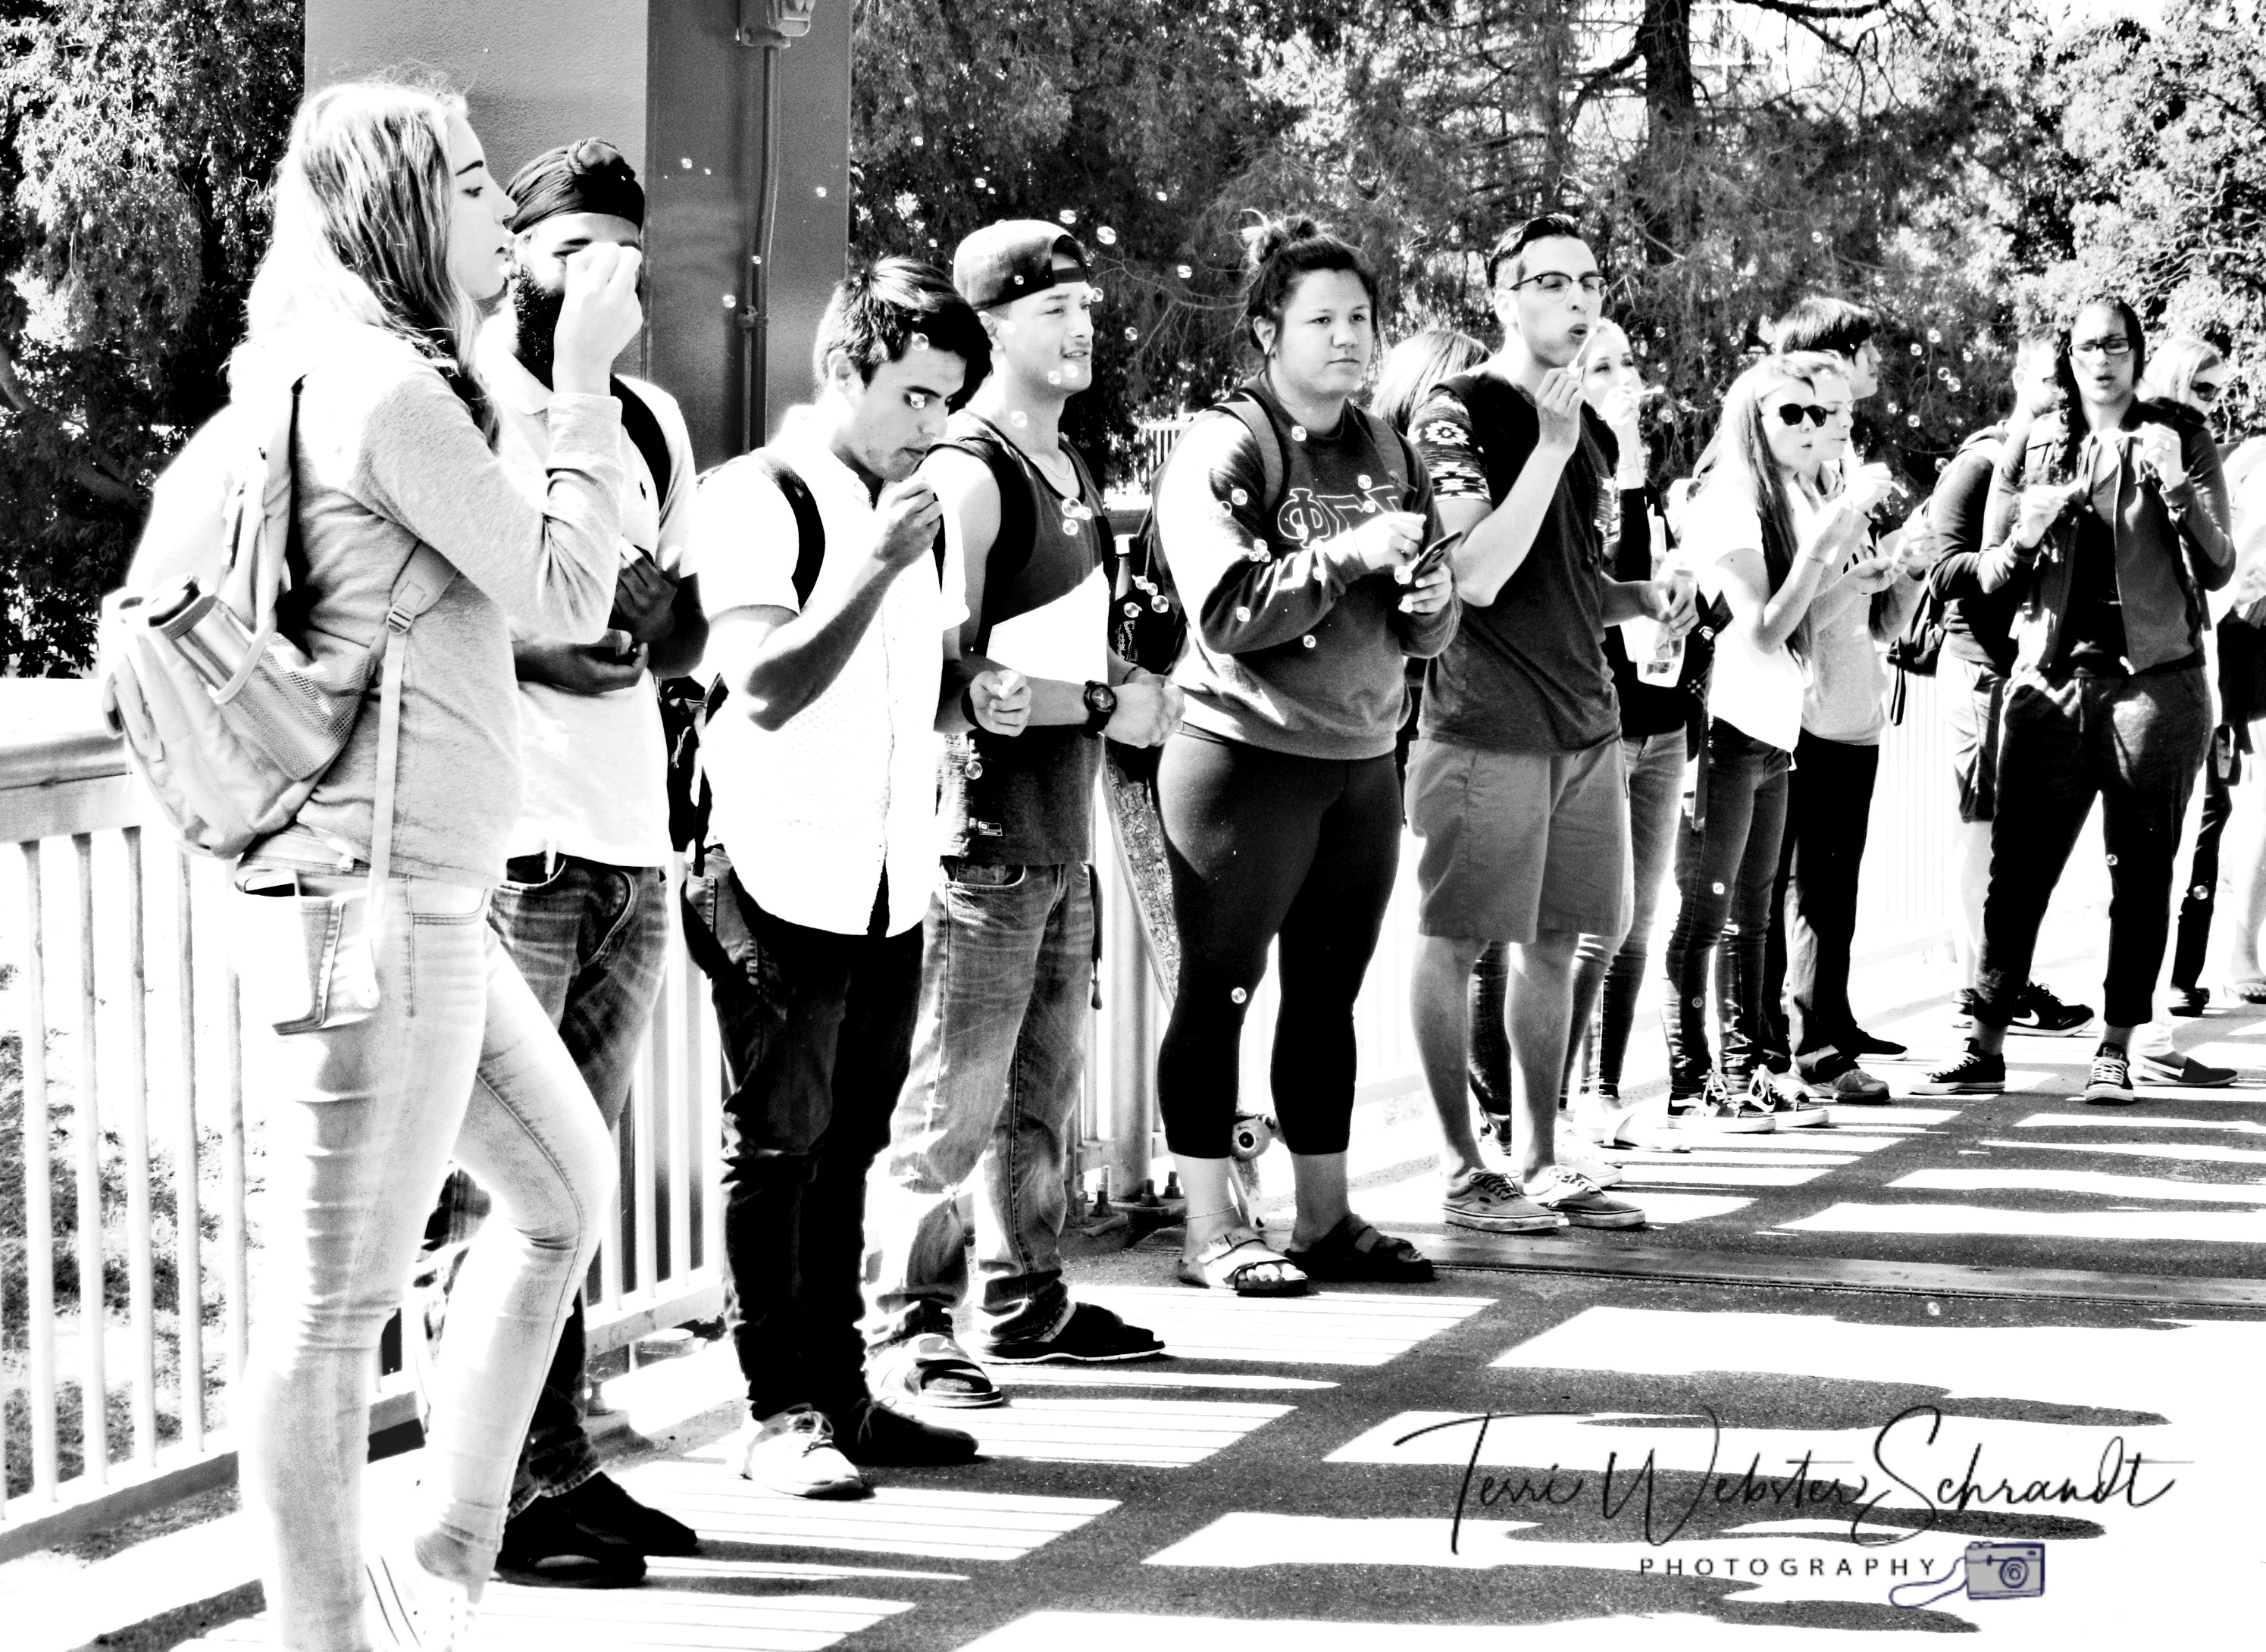 Students lined up to blow bubbles